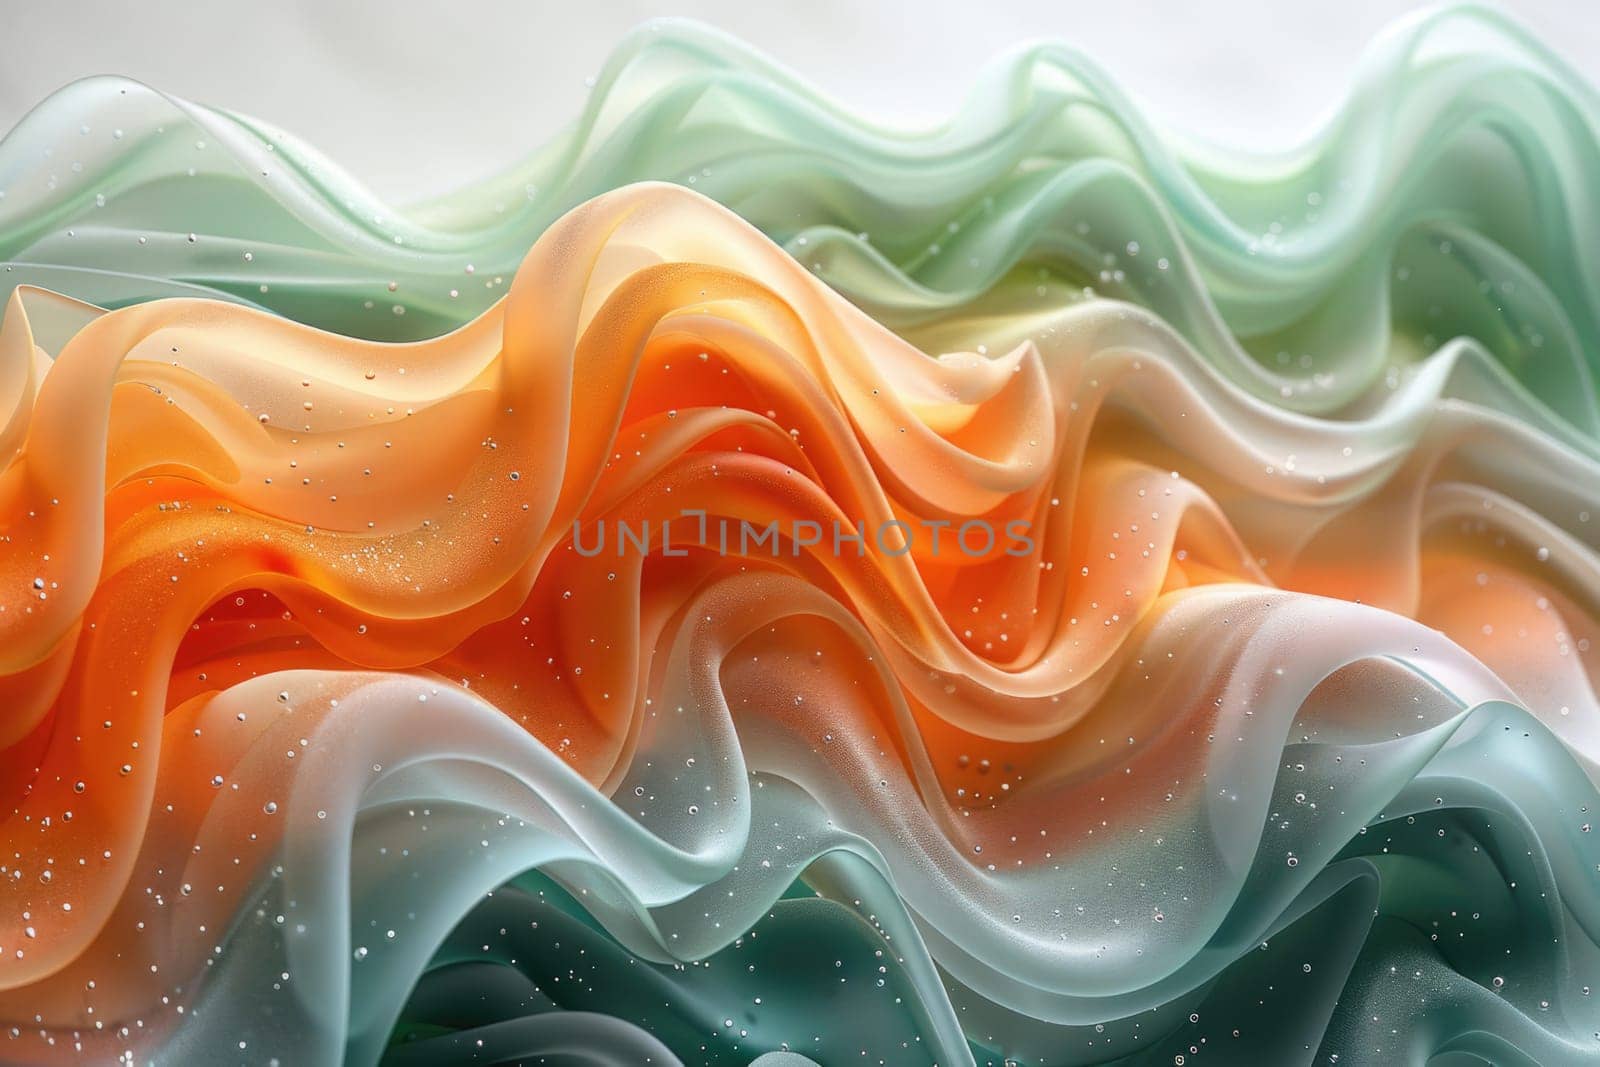 A hyper-realistic abstract painting capturing the movement and form of a wave of water with intricate details.